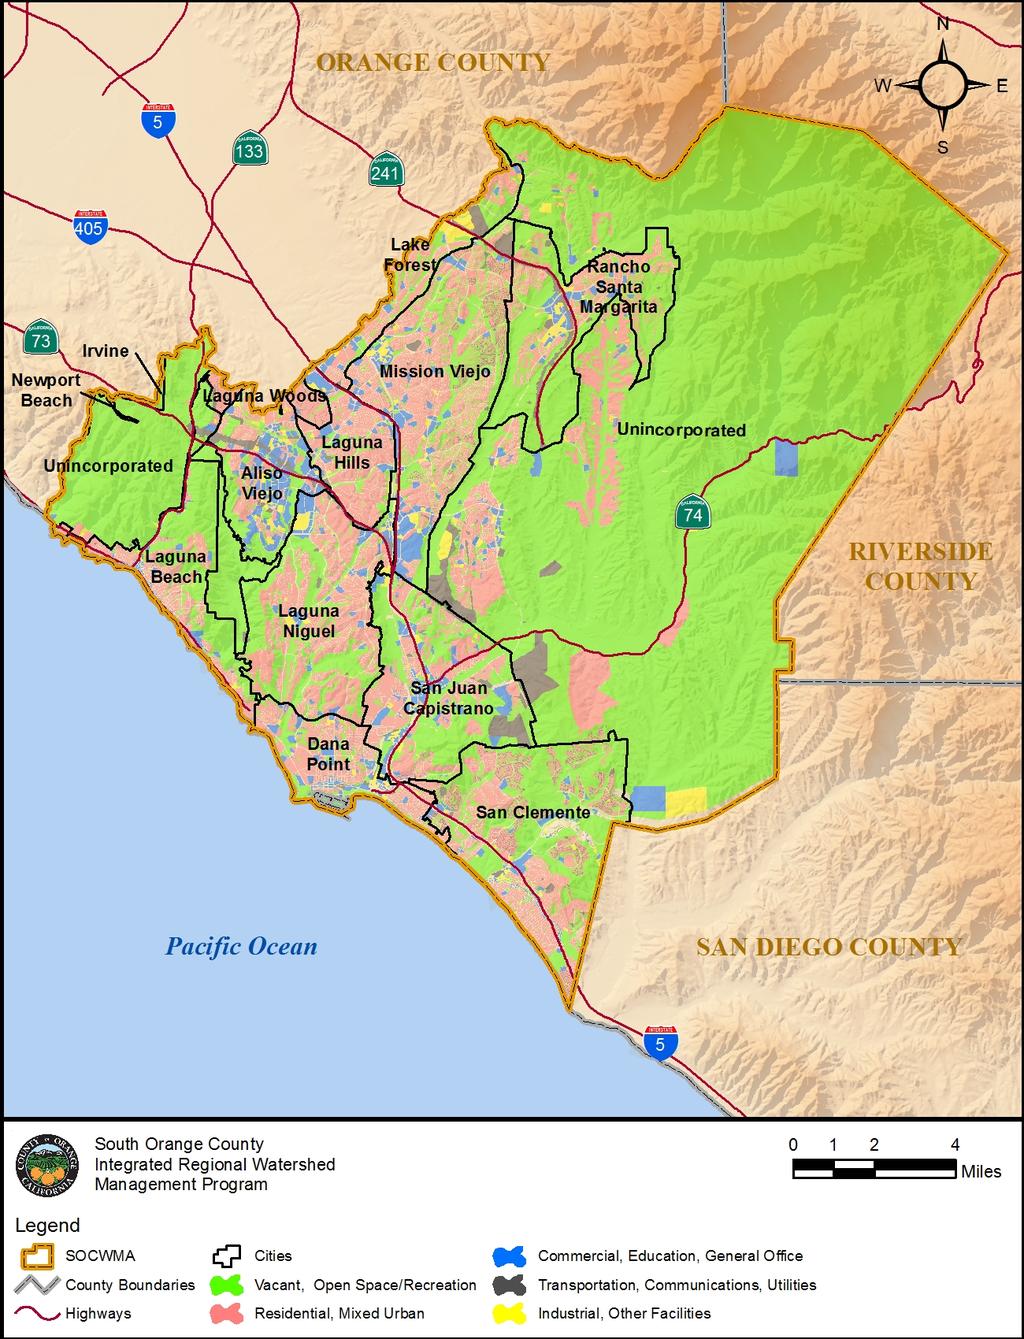 South Orange County Watershed